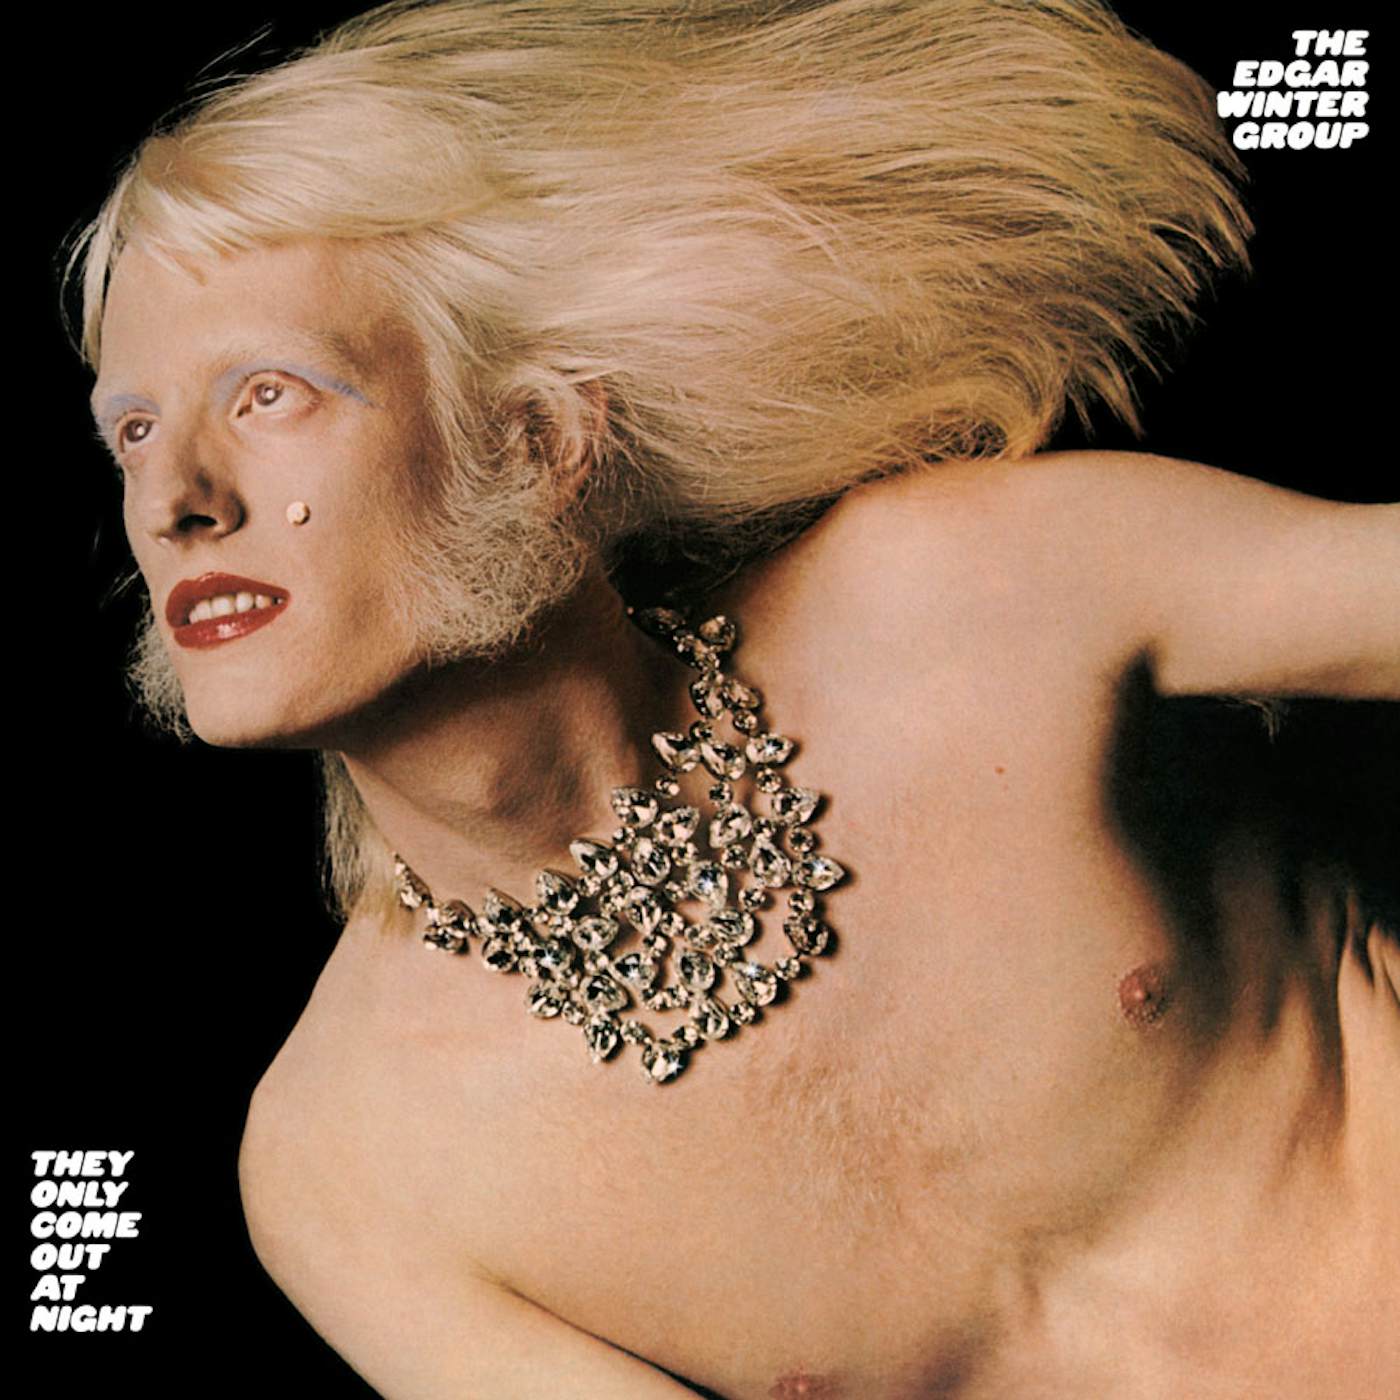 Edgar Winter They Only Come Out at Night Vinyl Record